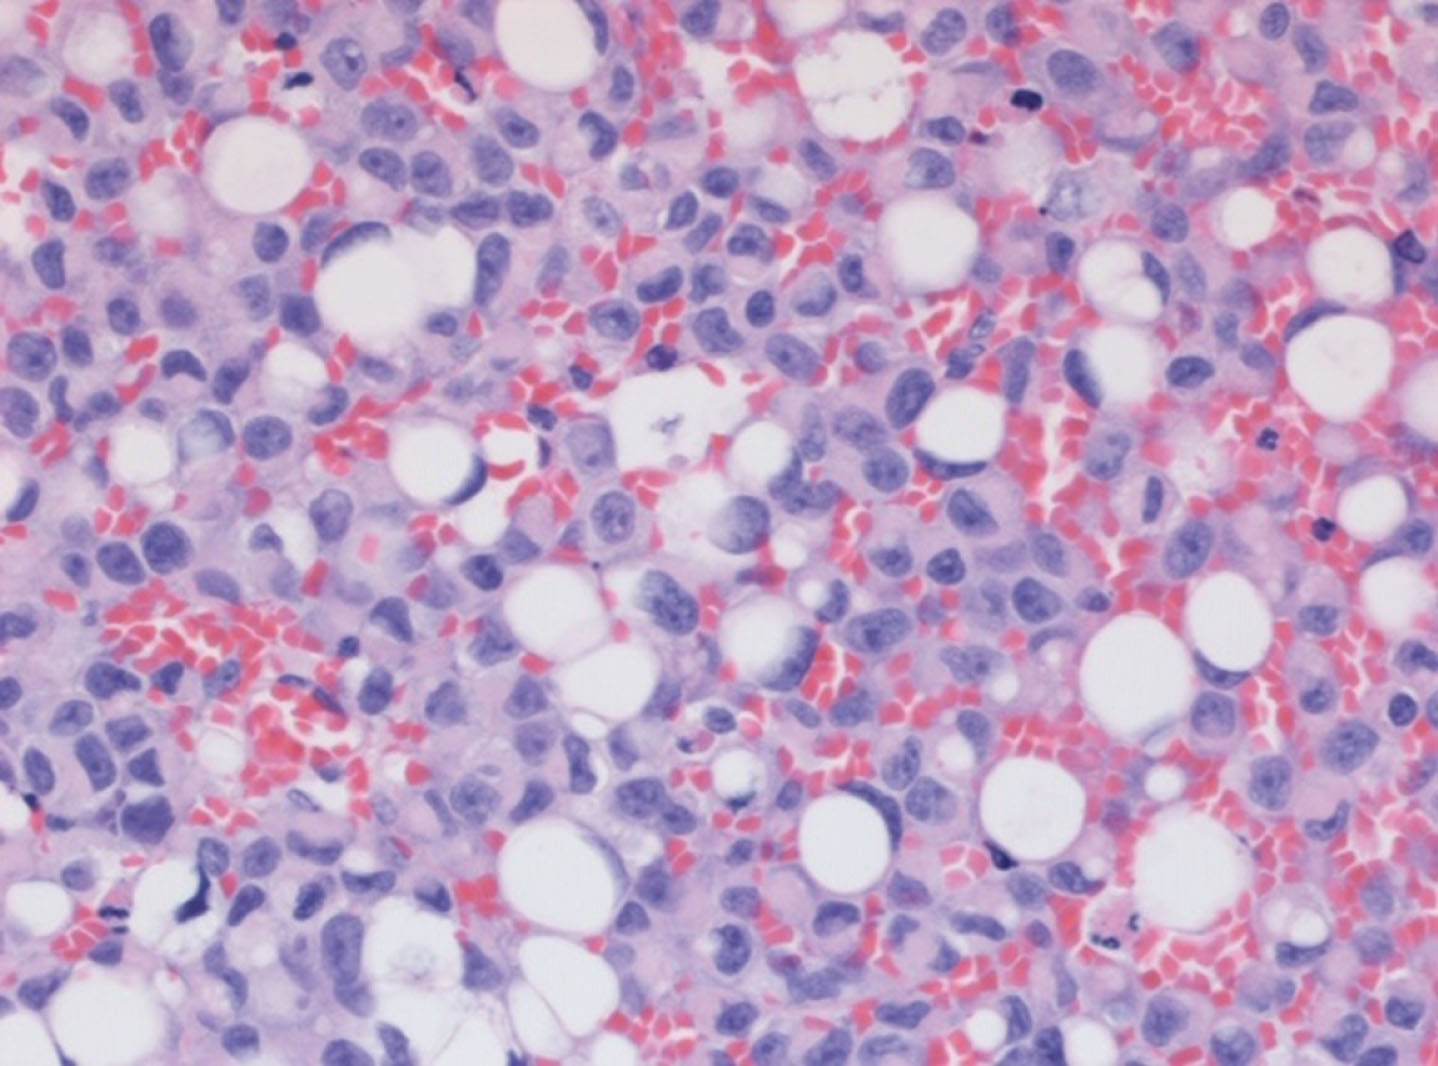 High grade Ta with plasmacytoid and signet cell features.